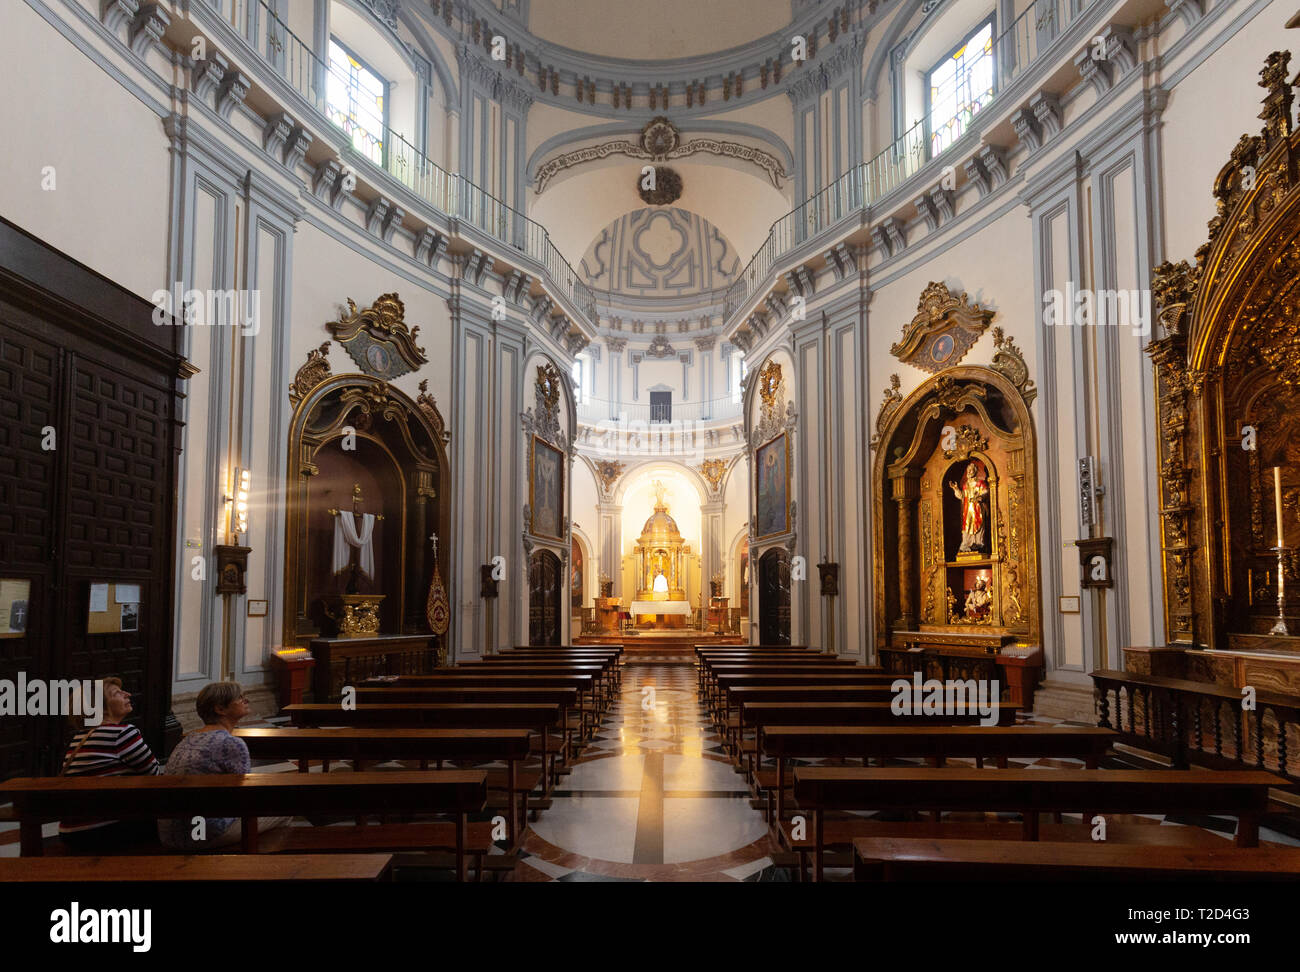 Malaga church - the nave in the interior of Iglesia de  San Felipe Neri (Church of San Felipe Neri), Malaga old town, Malaga Andalusia Spain Stock Photo